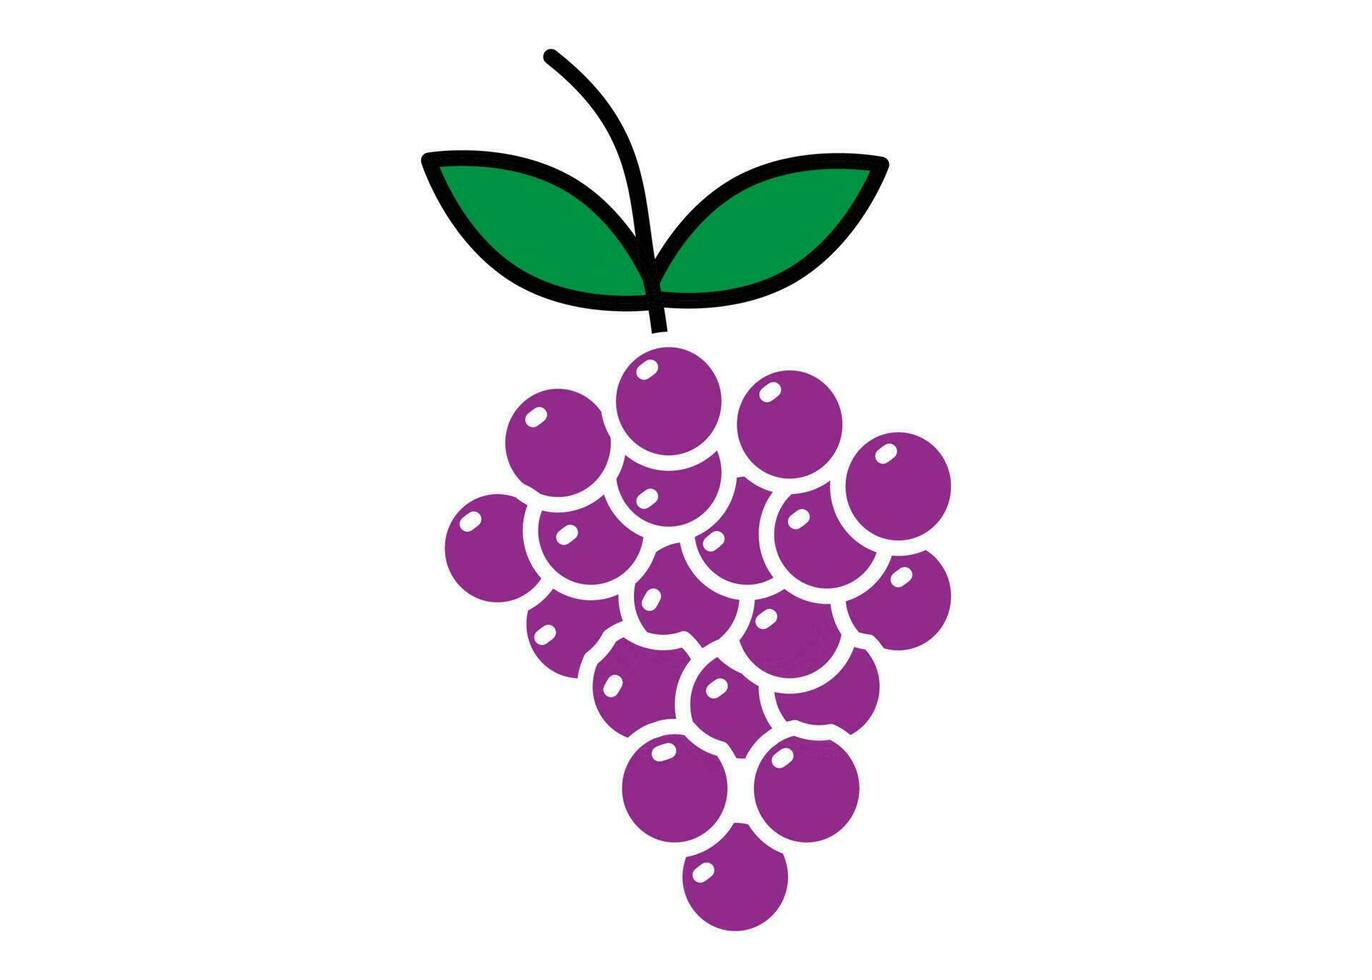 Grapes icon clipart design template isolated illustration vector